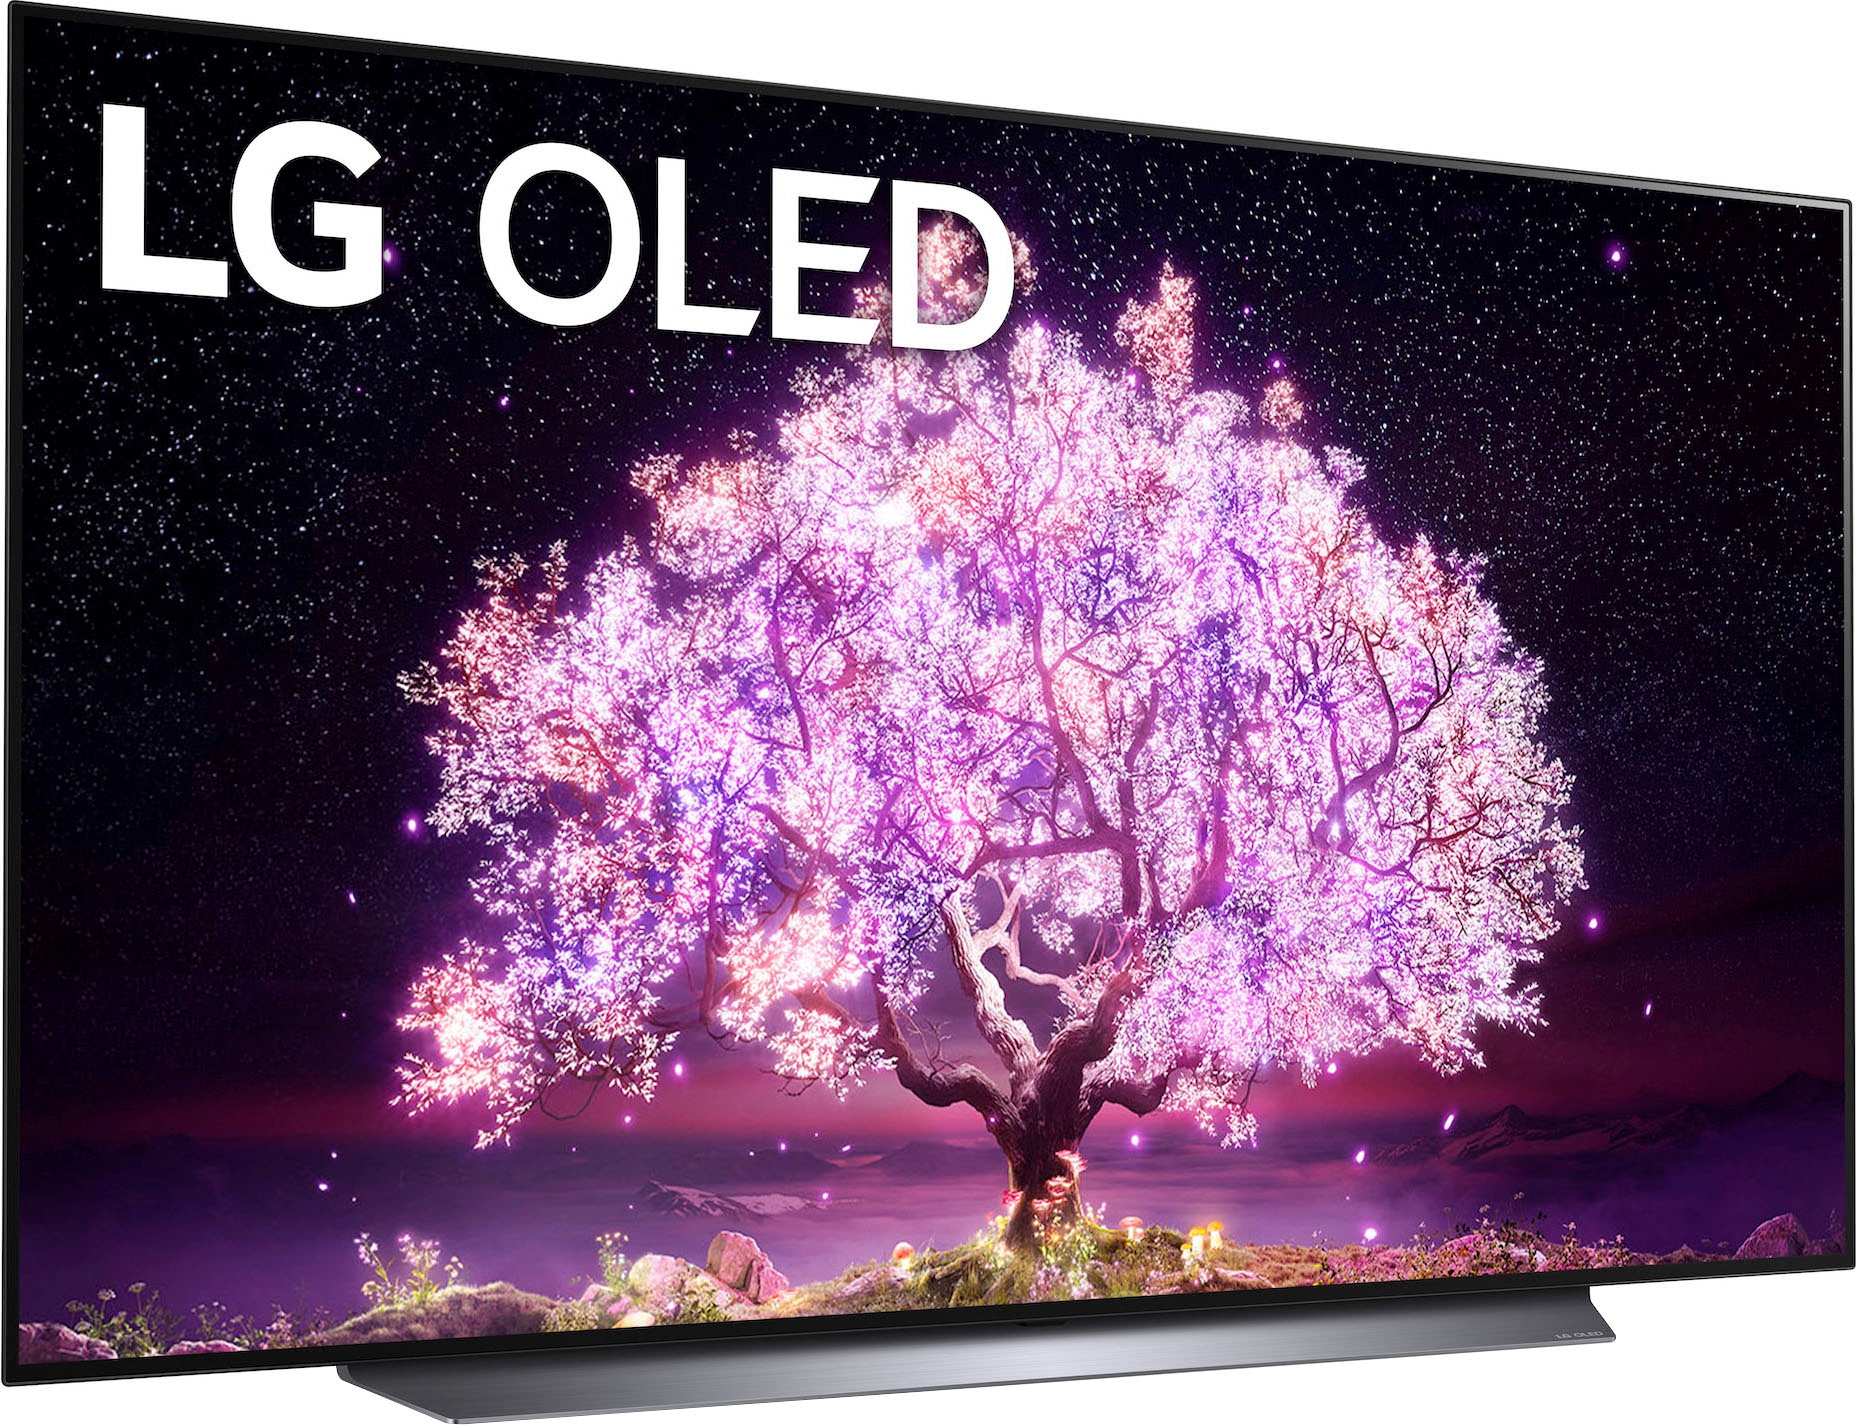 LG OLED-Fernseher HD, kaufen AI-Prozessor,Dolby 4K Zoll, & bei 195 Smart-TV, OTTO Gen4 OLED Dolby cm/77 Vision Atmos »OLED77C17LB«, jetzt ,α9 4K Ultra